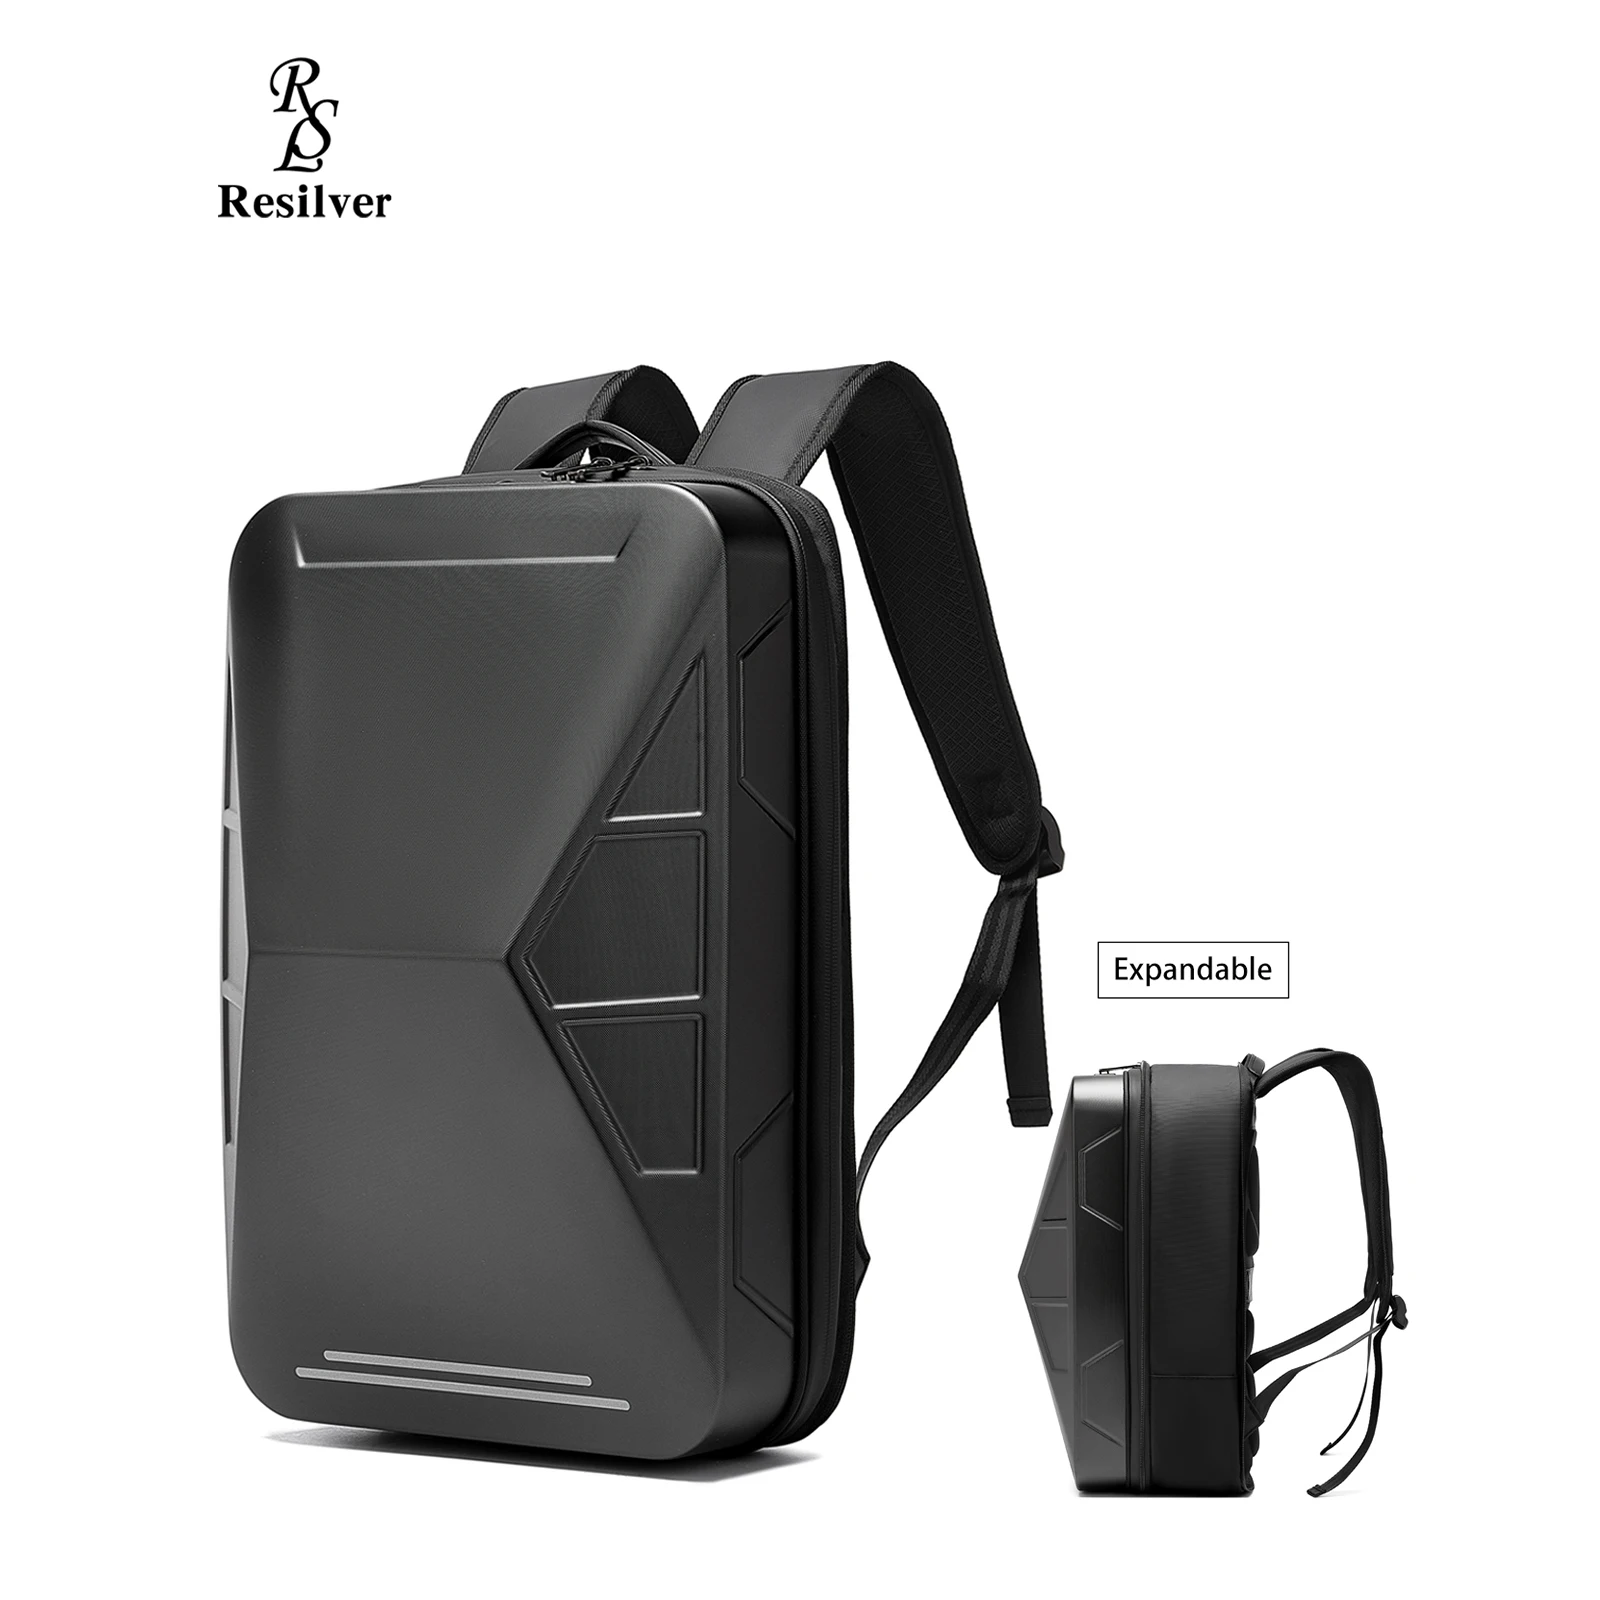 

Expansion Hard Shell Waterproof Gaming Backpack Anti Theft Laptop Backpack Light Slim with USB Port fit for 16inch notebook